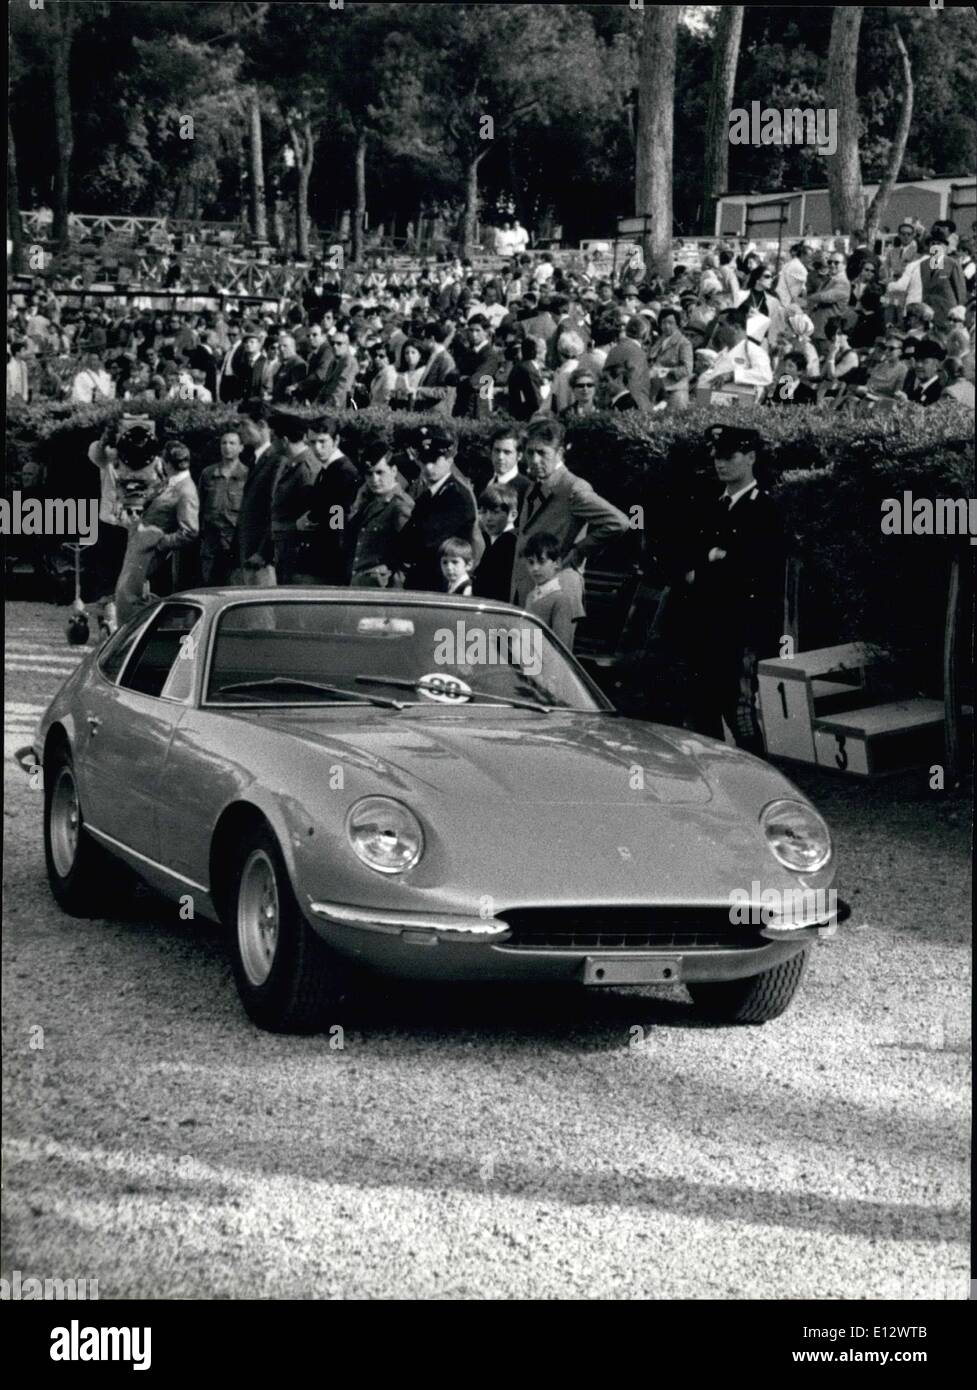 Feb. 26, 2012 - The prototype of Ferrari Daytona 4.400 was presented to the people in Rome, during the Rome International horse show. The sole model of this car was builder by body PininfarinaÃ Stock Photo